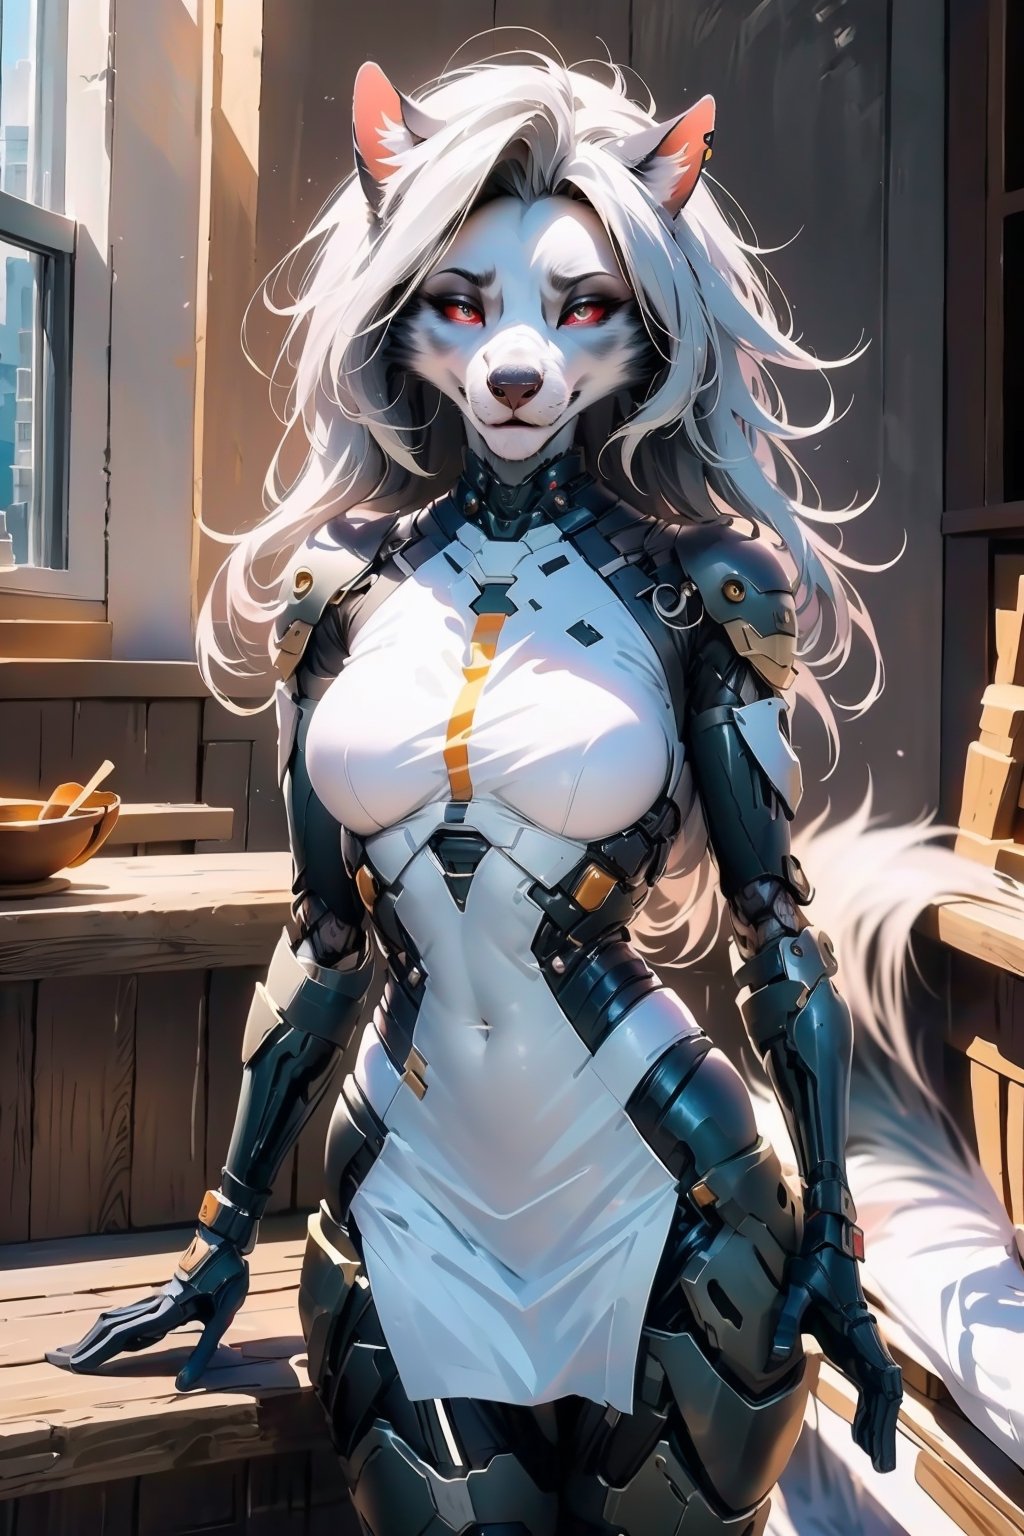 Uploaded on e621, by Pixelsketcher, by Bayard Wu, by Thomas Benjamin Kennington, by Einshelm, solo anthro, ((face portrait)), (( wearing  cybersuit)), (detailed Bonifasko lighting), (detailed fur), (detailed skin), ((wearing cybersuit)), (( long white hair)), ((facing viewer )), (cinematic lighting), ((detailed country side background)), ((face view)), (((portrait view))), (half shadow), [backlighting], [crepuscular ray], [detailed ambient light], [grey natural lighting], [ambient light], (higher wildlife feral detail), [sharp focus], (questionable content), (shaded), ((masterpiece), long white hair, regular featureless breasts, breasts, furry grey and white hellhound, grey hellhound face, Furry Fantasy Art, Anthro Art, Commission for High Res, Furry Art, furry Art, Sakimichan beautiful, masterpiece, regular featureless breasts, best quality, detailed image, bright colors, detailed face, perfect lighting, perfect shadows, perfect eyes, girl focus, hellhound eyes, flawless face, regular featureless breasts, gorgeous, shiny face, face focus, grey hellhound ears, grey hellhound girl, fluffy, fluffy woman, face fur, animal nose, muzzle, one-tone fur, gaze at the viewer, half-closed eyes, 1girl, solo, full face only, (masterpiece), (best quality), (illustration), (cinematic lighting), long white hair, detailed fur, balanced coloring, global illumination, ray tracing, good lighting, grey hellhound, furry, anthro, attractive face, sexy face, looking at viewer, seductive look, full body picture, perfect legs, loona, detailed cybersuit, Marlok artstyle,Marlok artstyle , beautiful girl ,ah1,defTifa,Mecha body